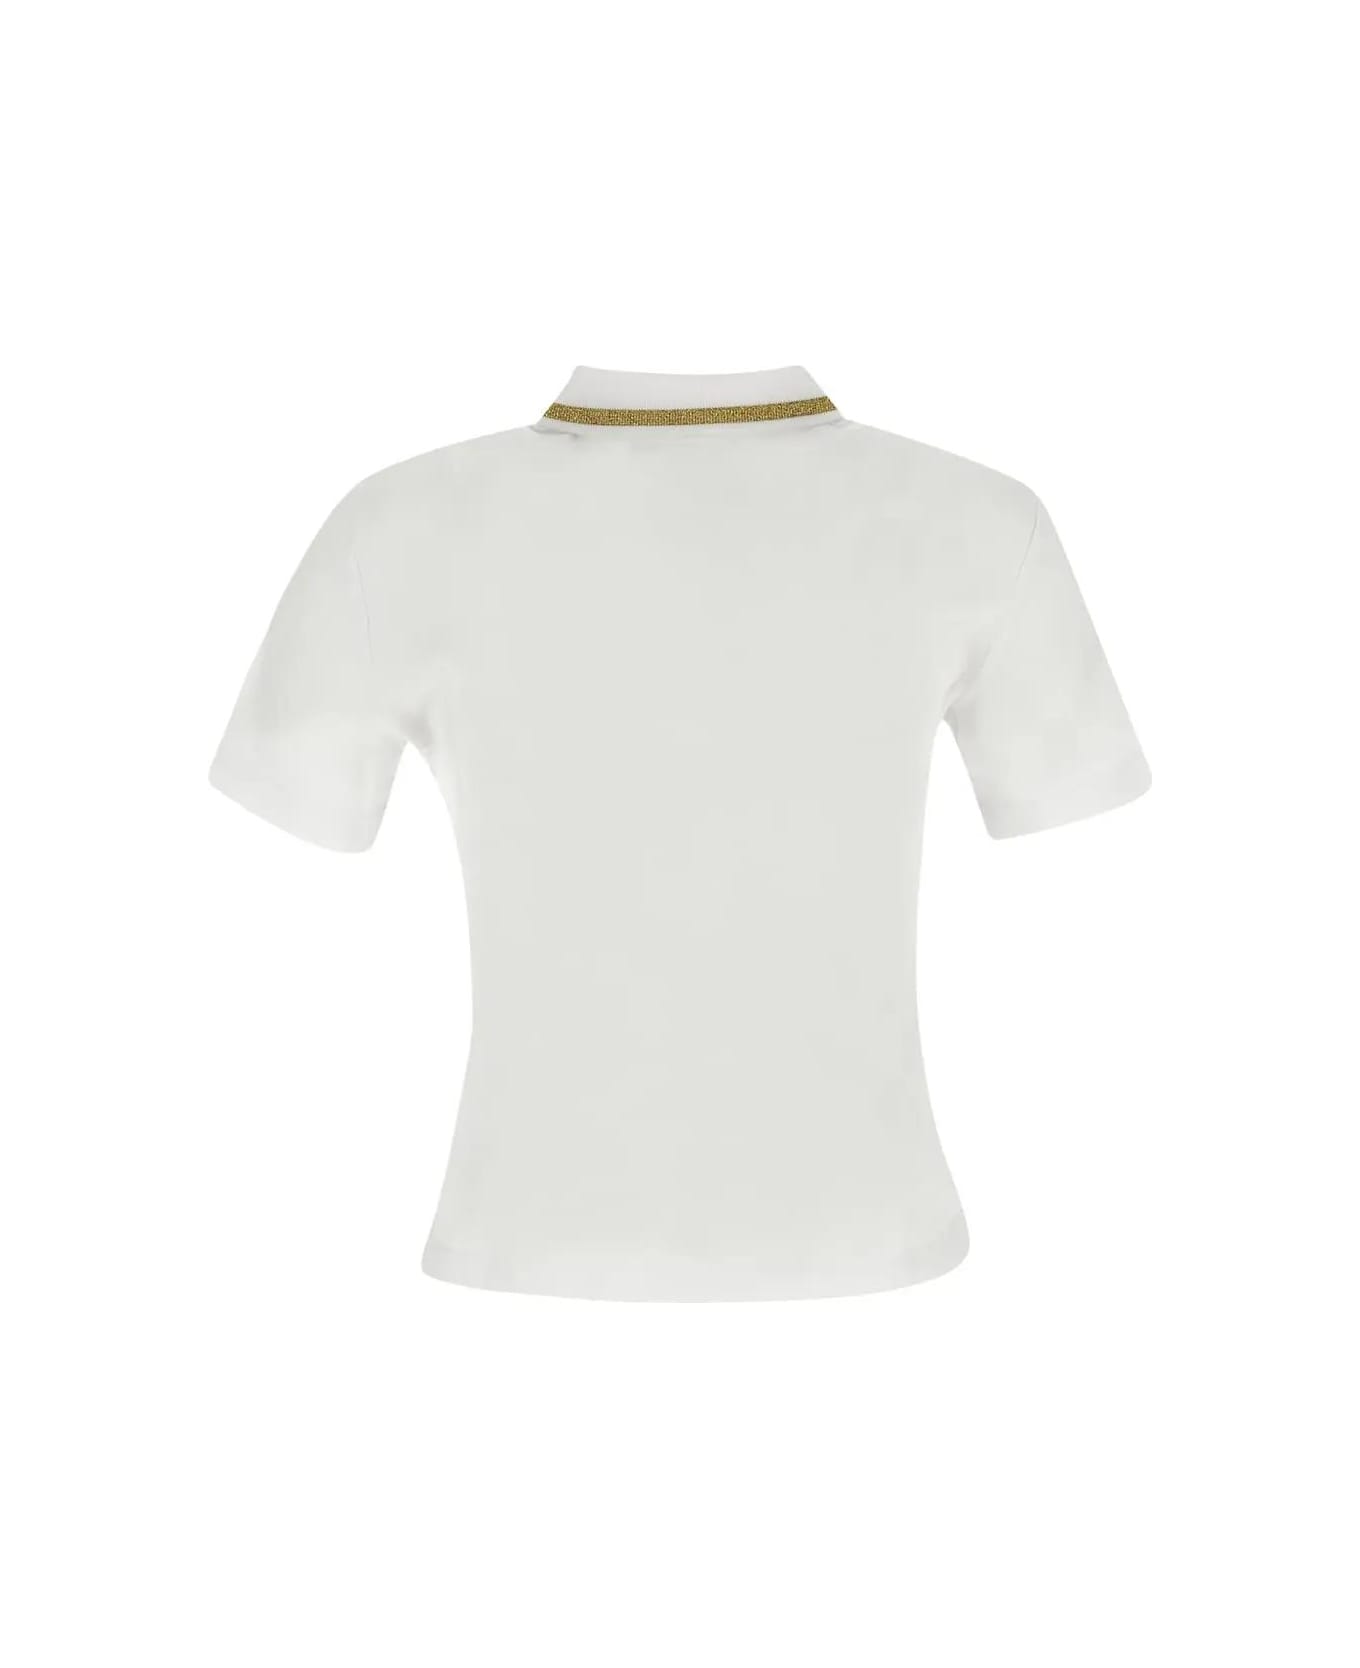 Versace Jeans Couture Logoed Polo - White